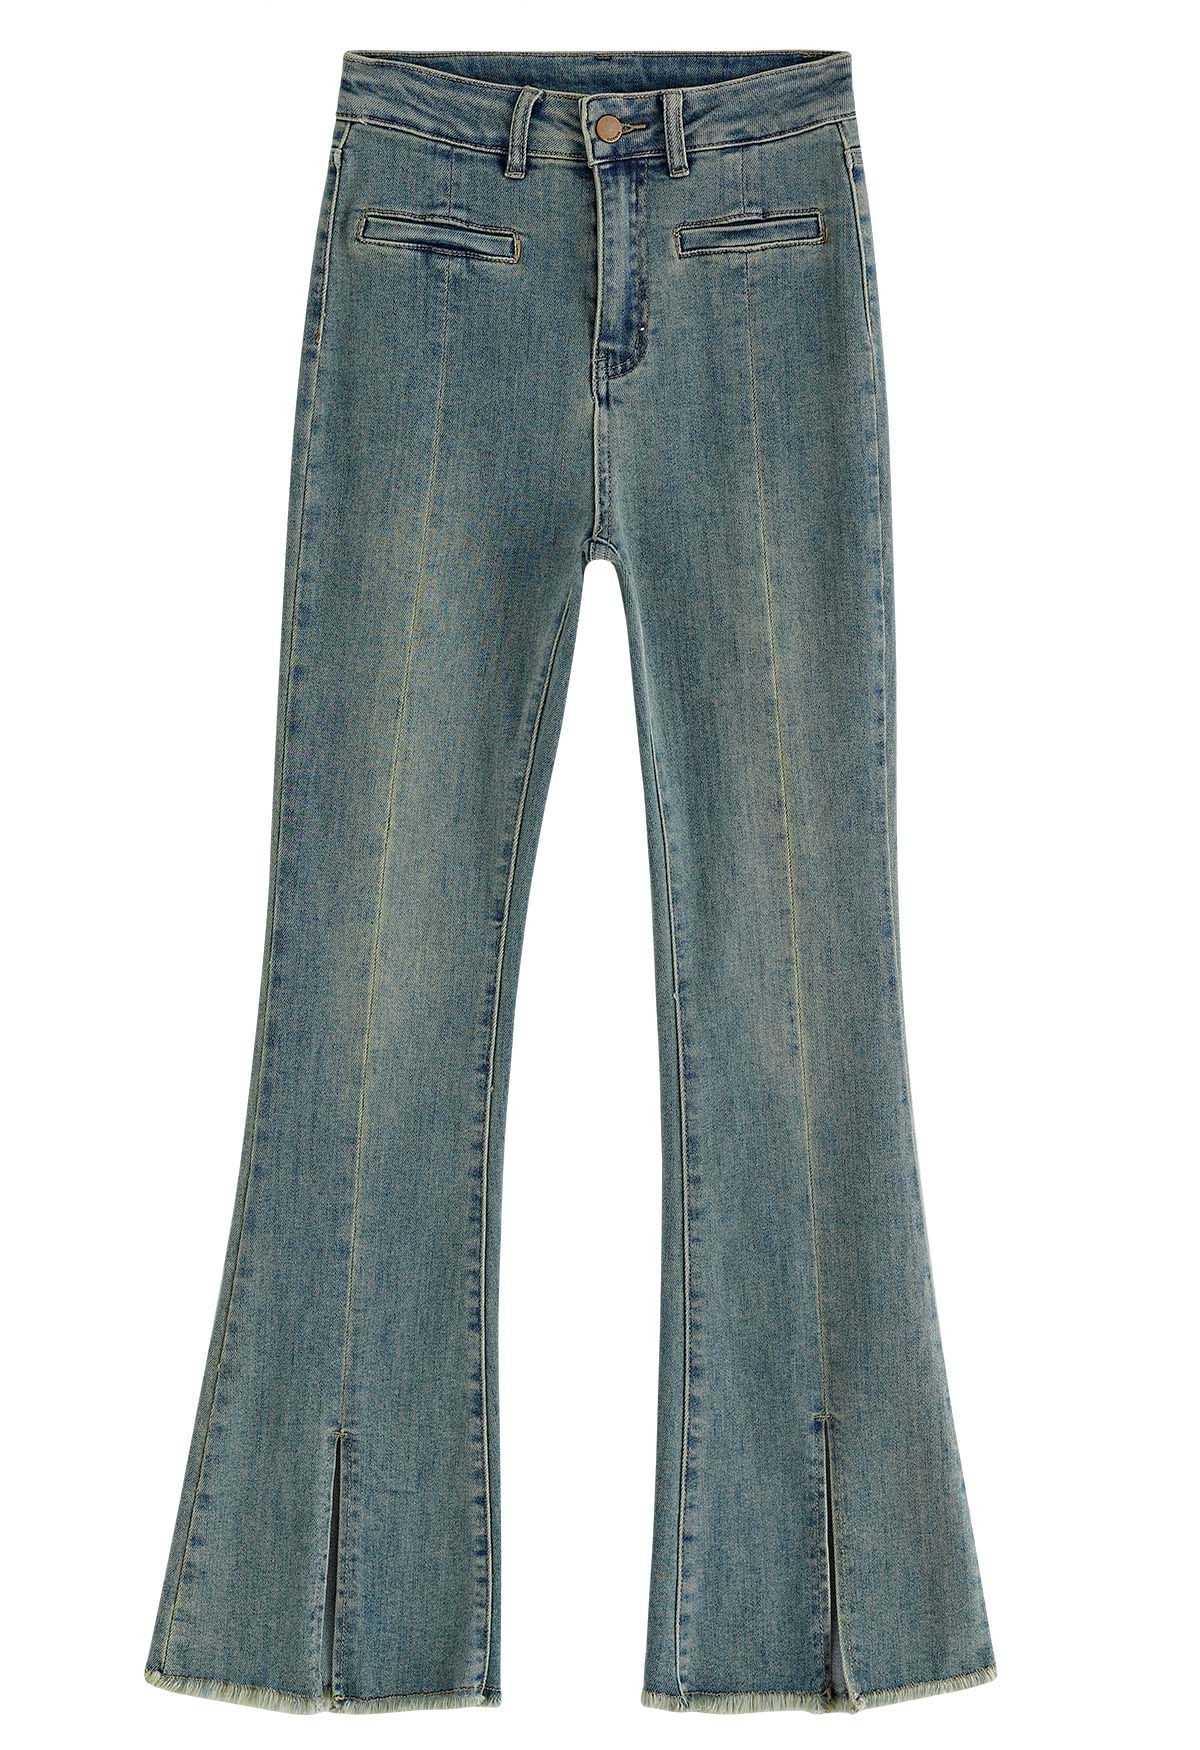 These unique frayed hem jeans are such a must-have style for any